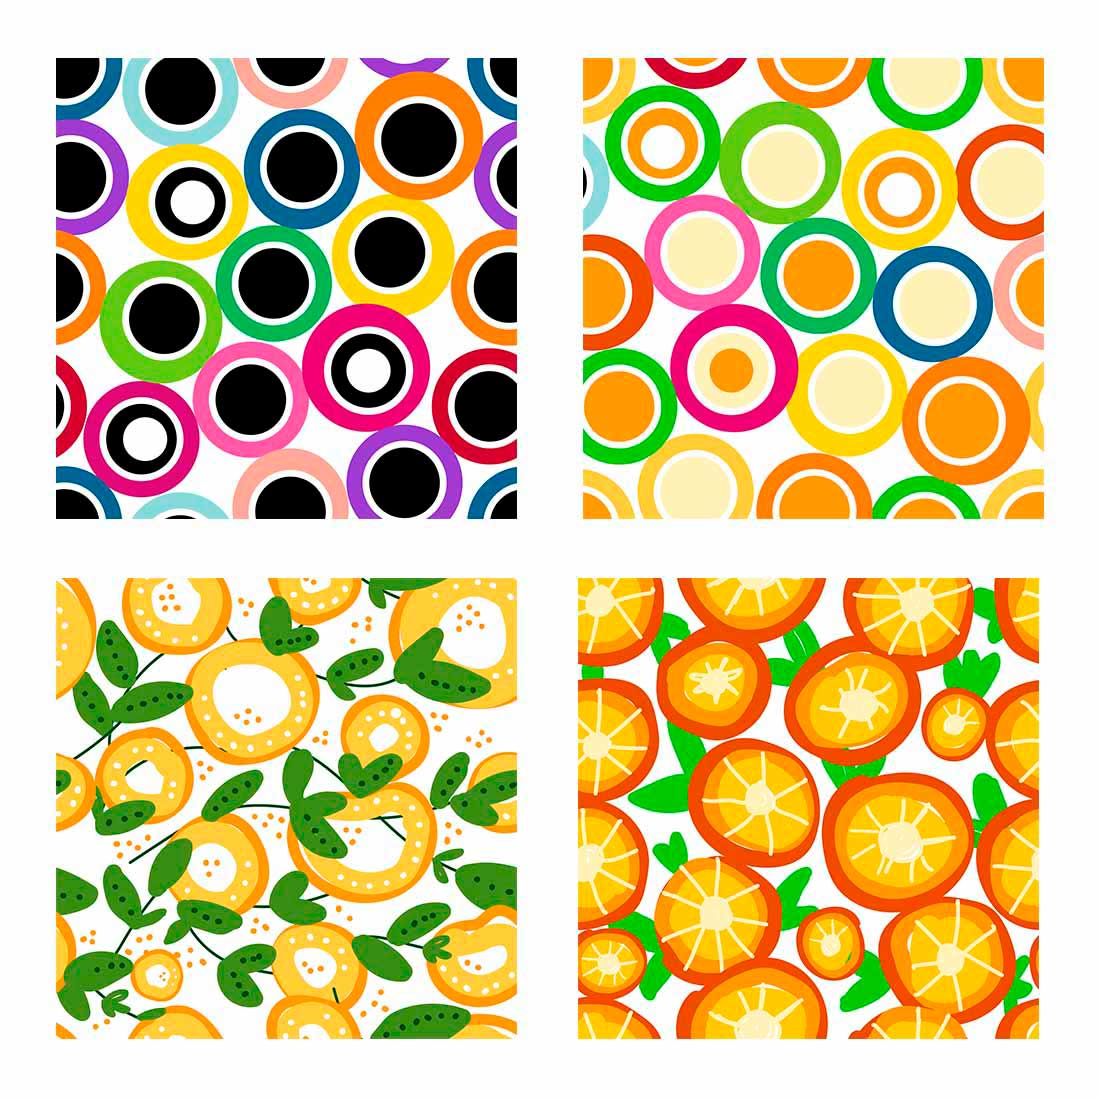 A selection of images of exquisite bright patterns.